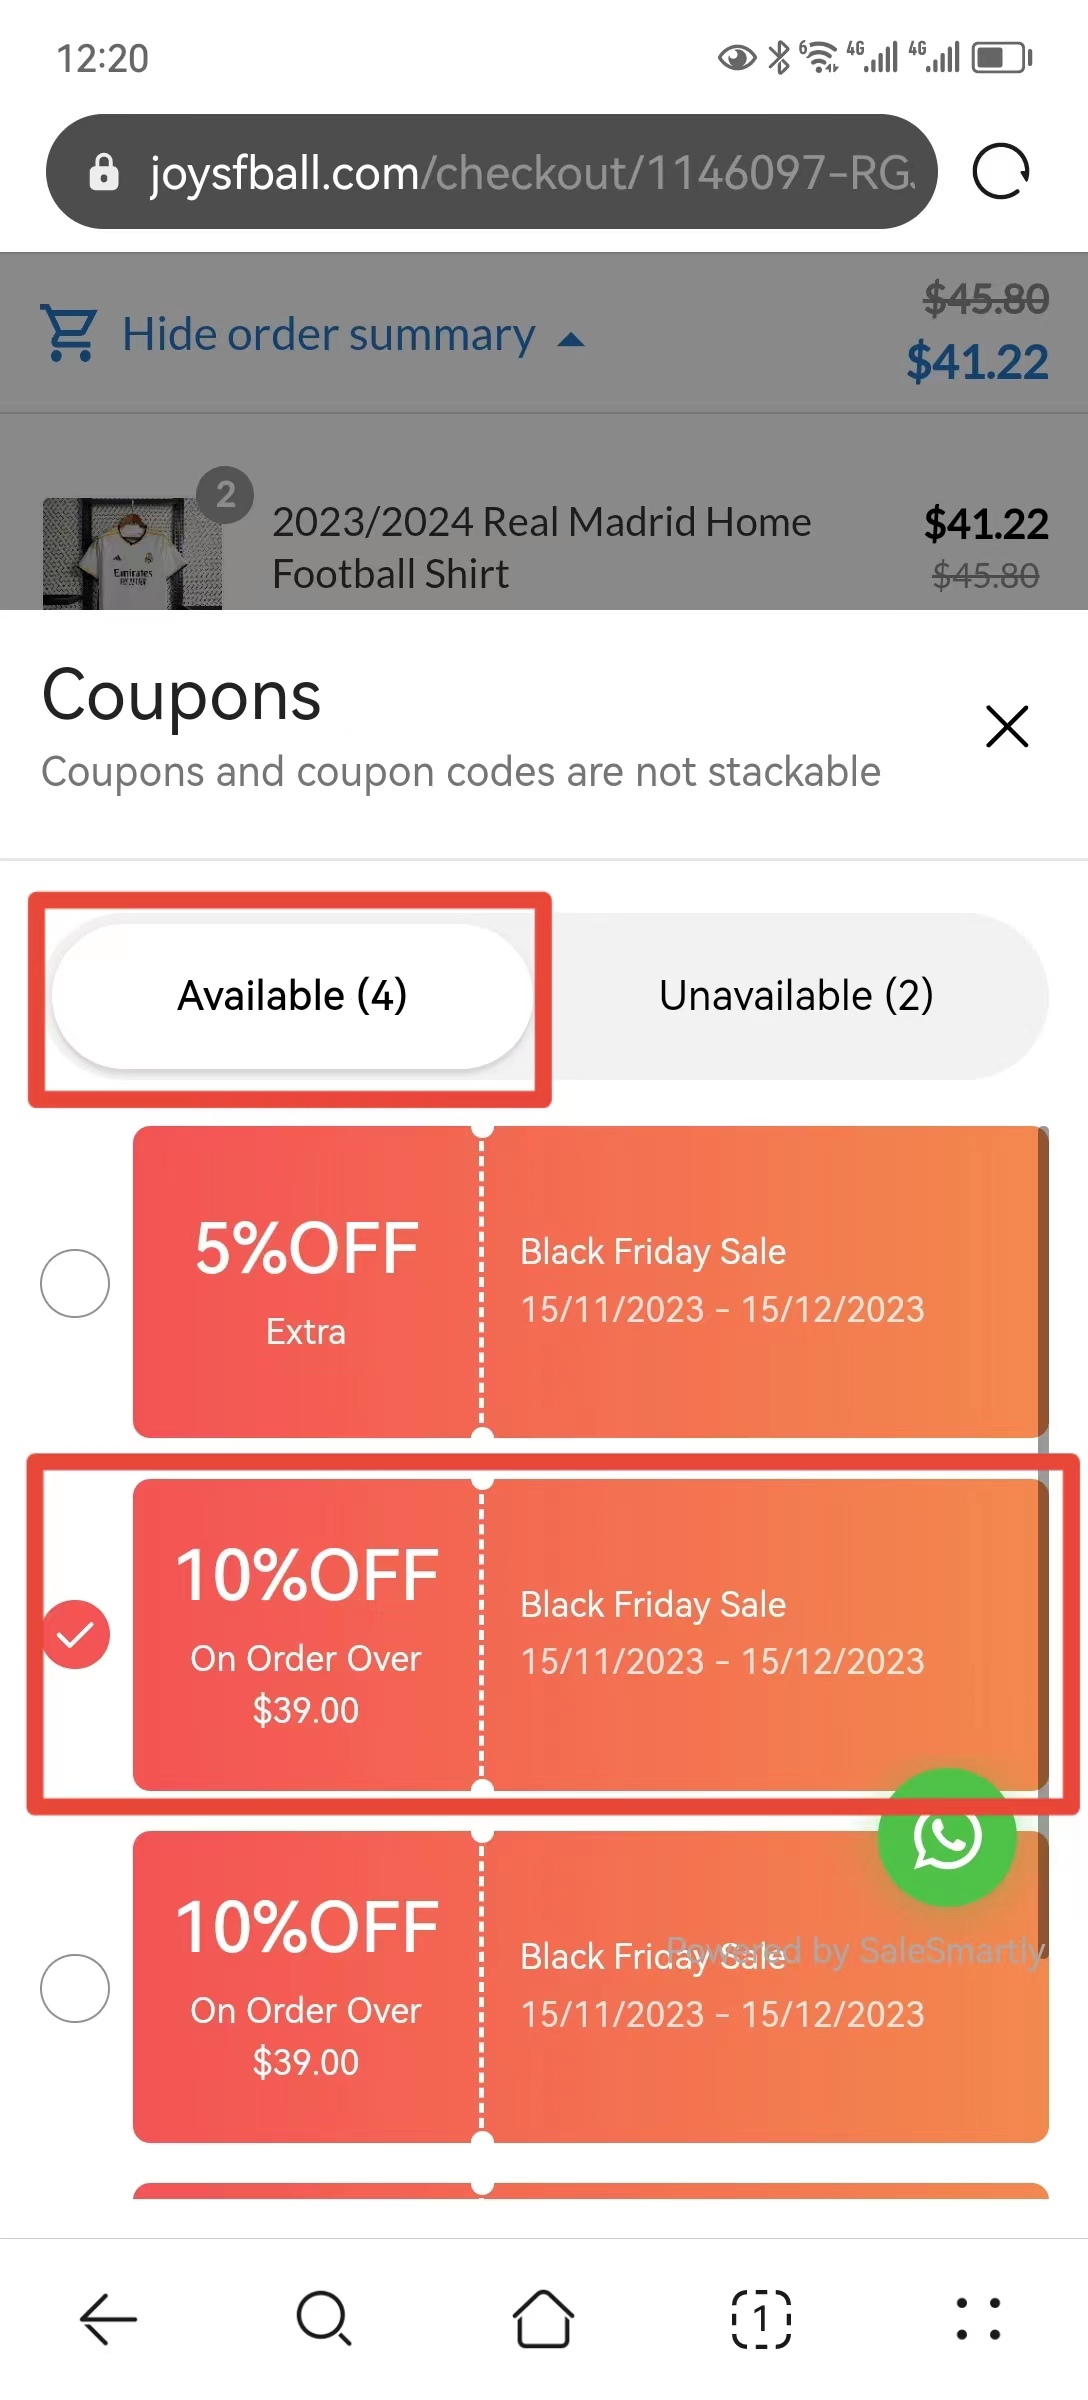 How To Use Coupon?